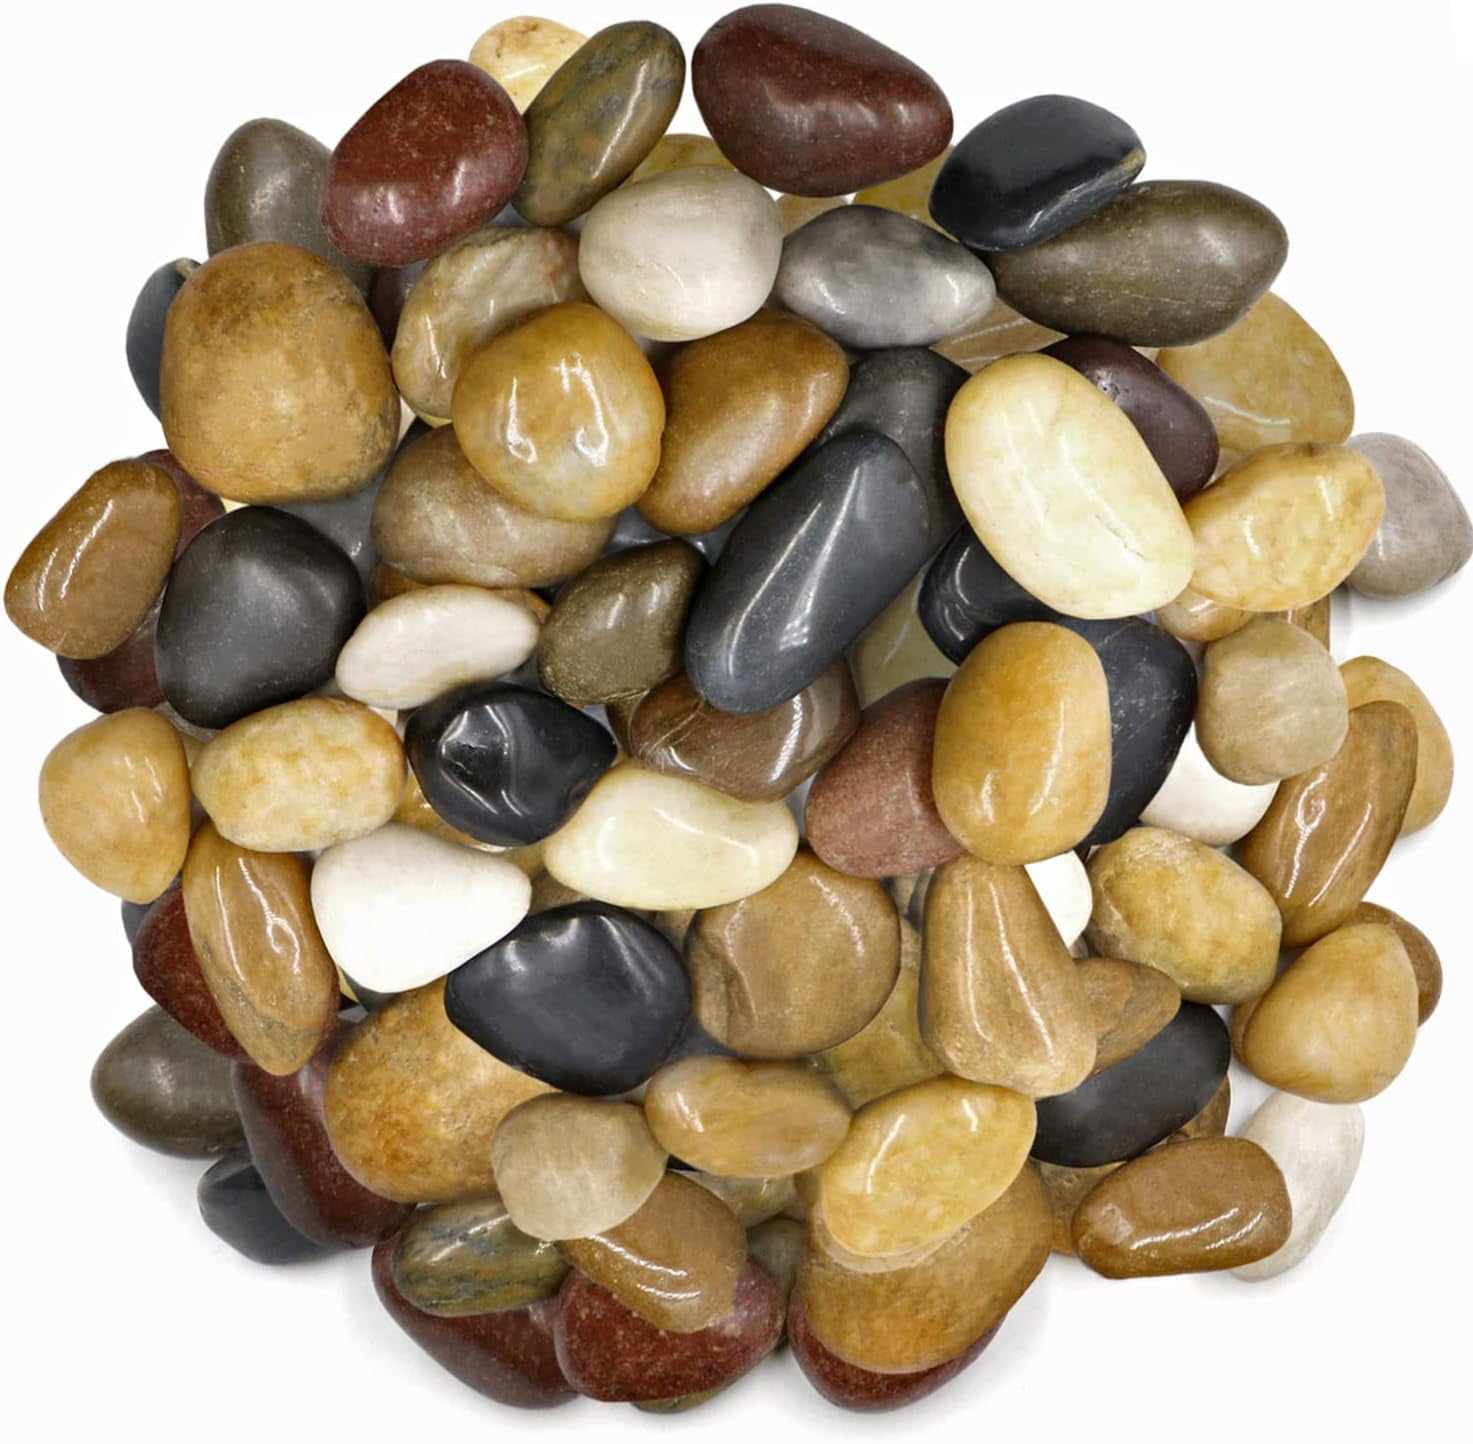 10lbs River Rocks, Decorative Pebbles for Plants, Fish Tank, Landscaping,  Natural Polished, Mixed Colors, 3/8 to 1 1/2 Inch